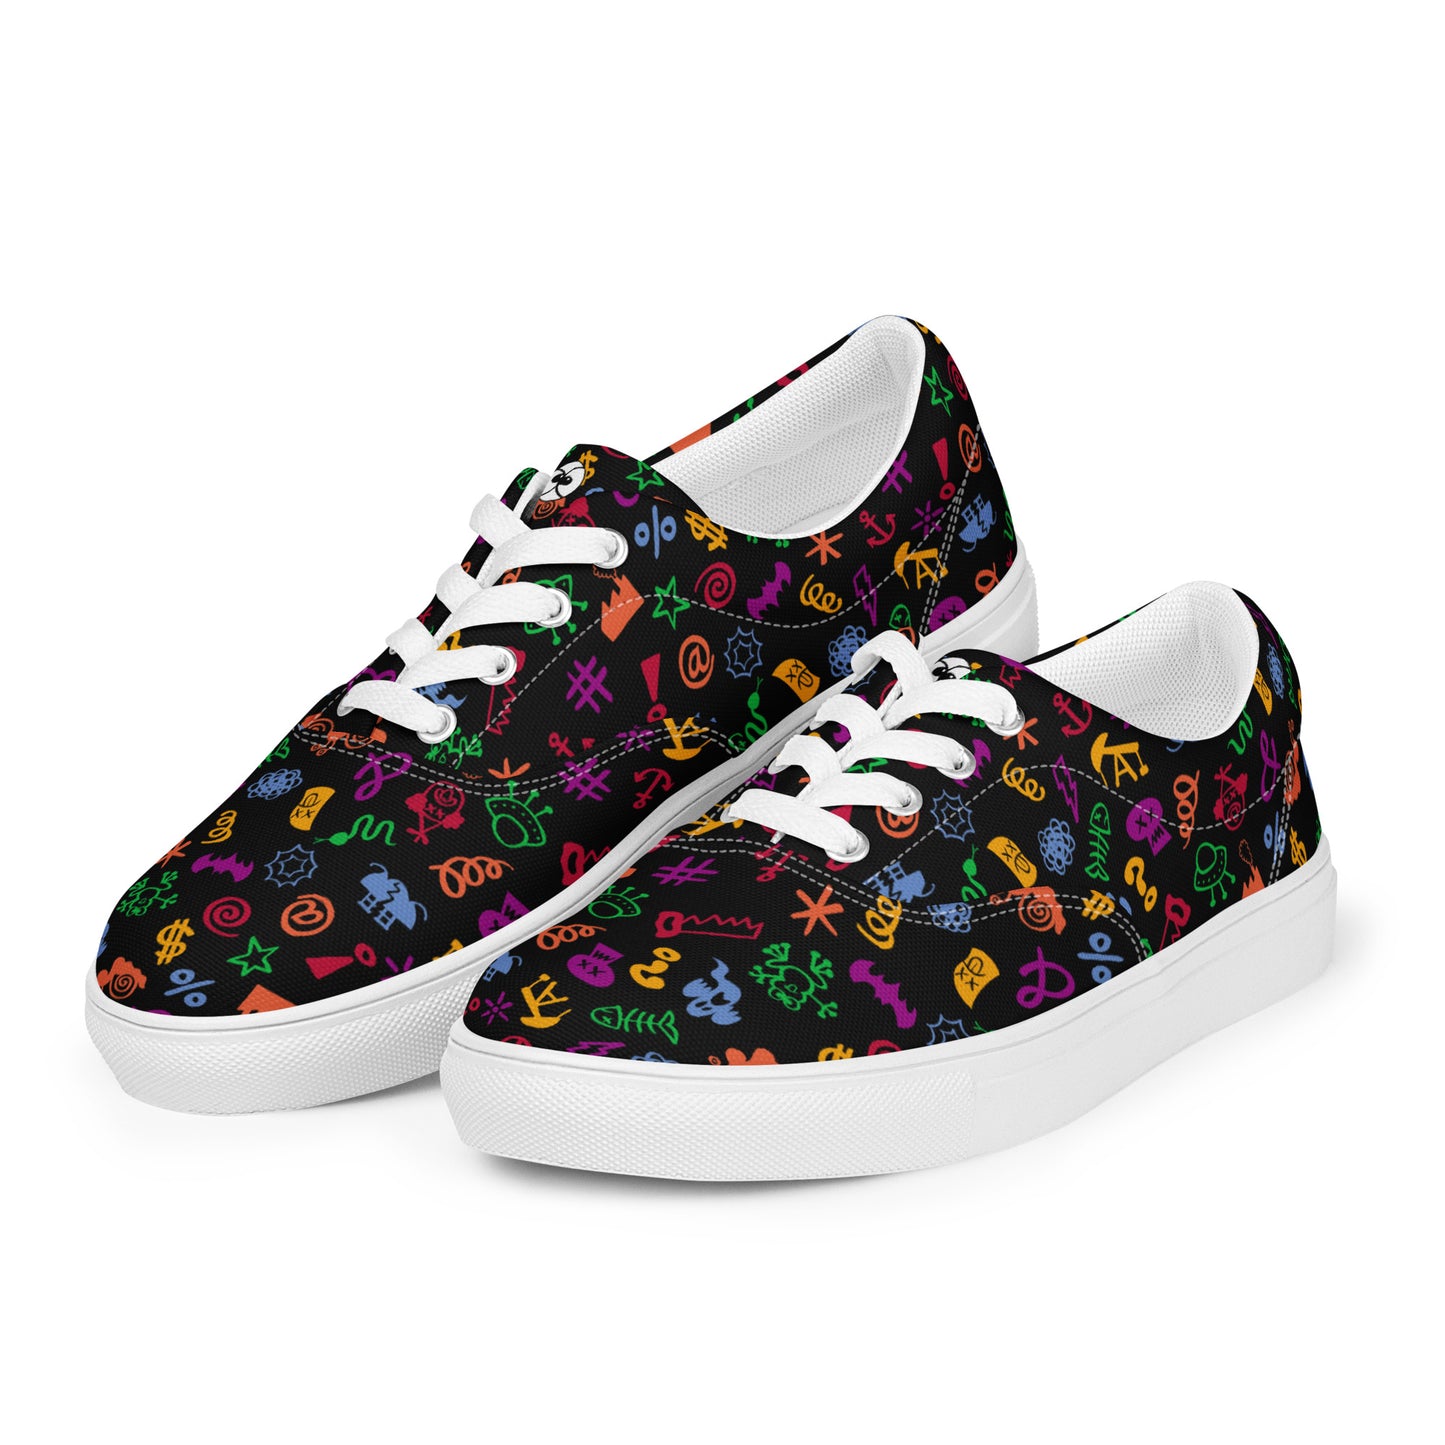 Wear these Women’s lace-up canvas shoes, swear with confidence, keep your smile. Overview